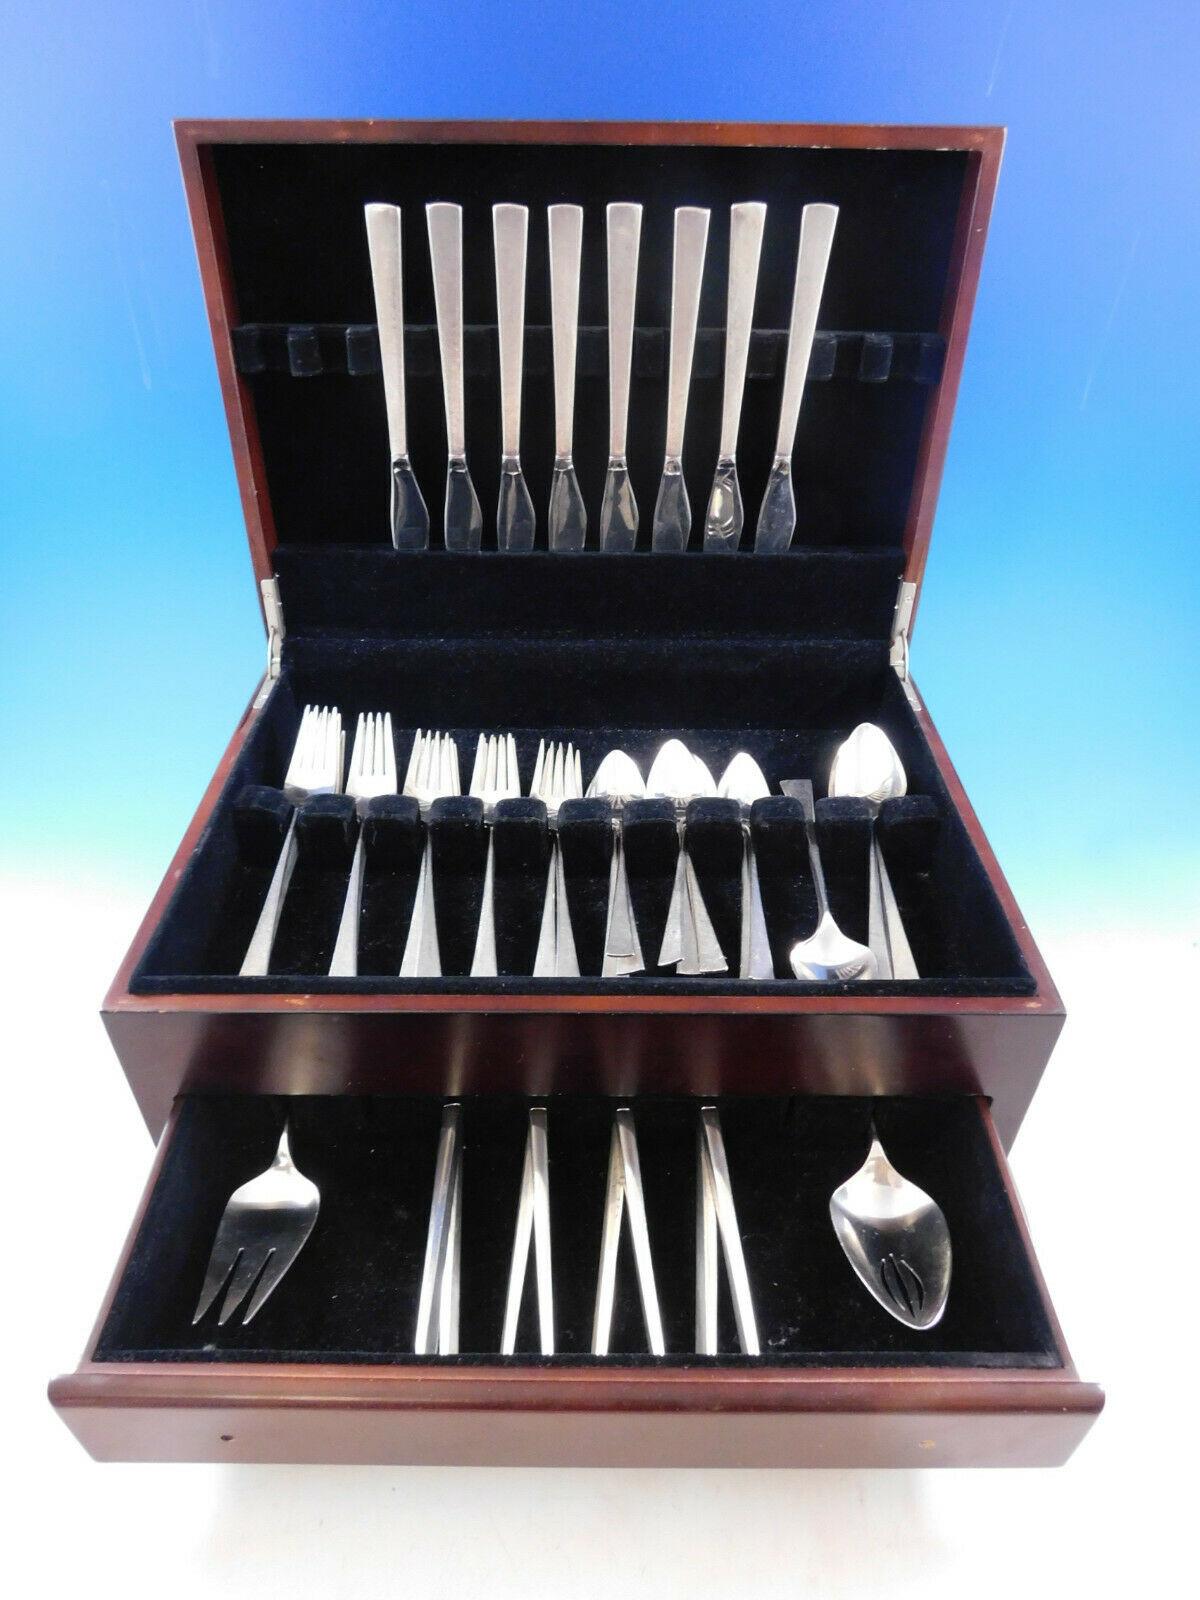 Da Vinci by Reed & Barton circa 1967 Sterling Silver flatware set - 50 pieces. This set includes:

8 Knives, 9 1/8